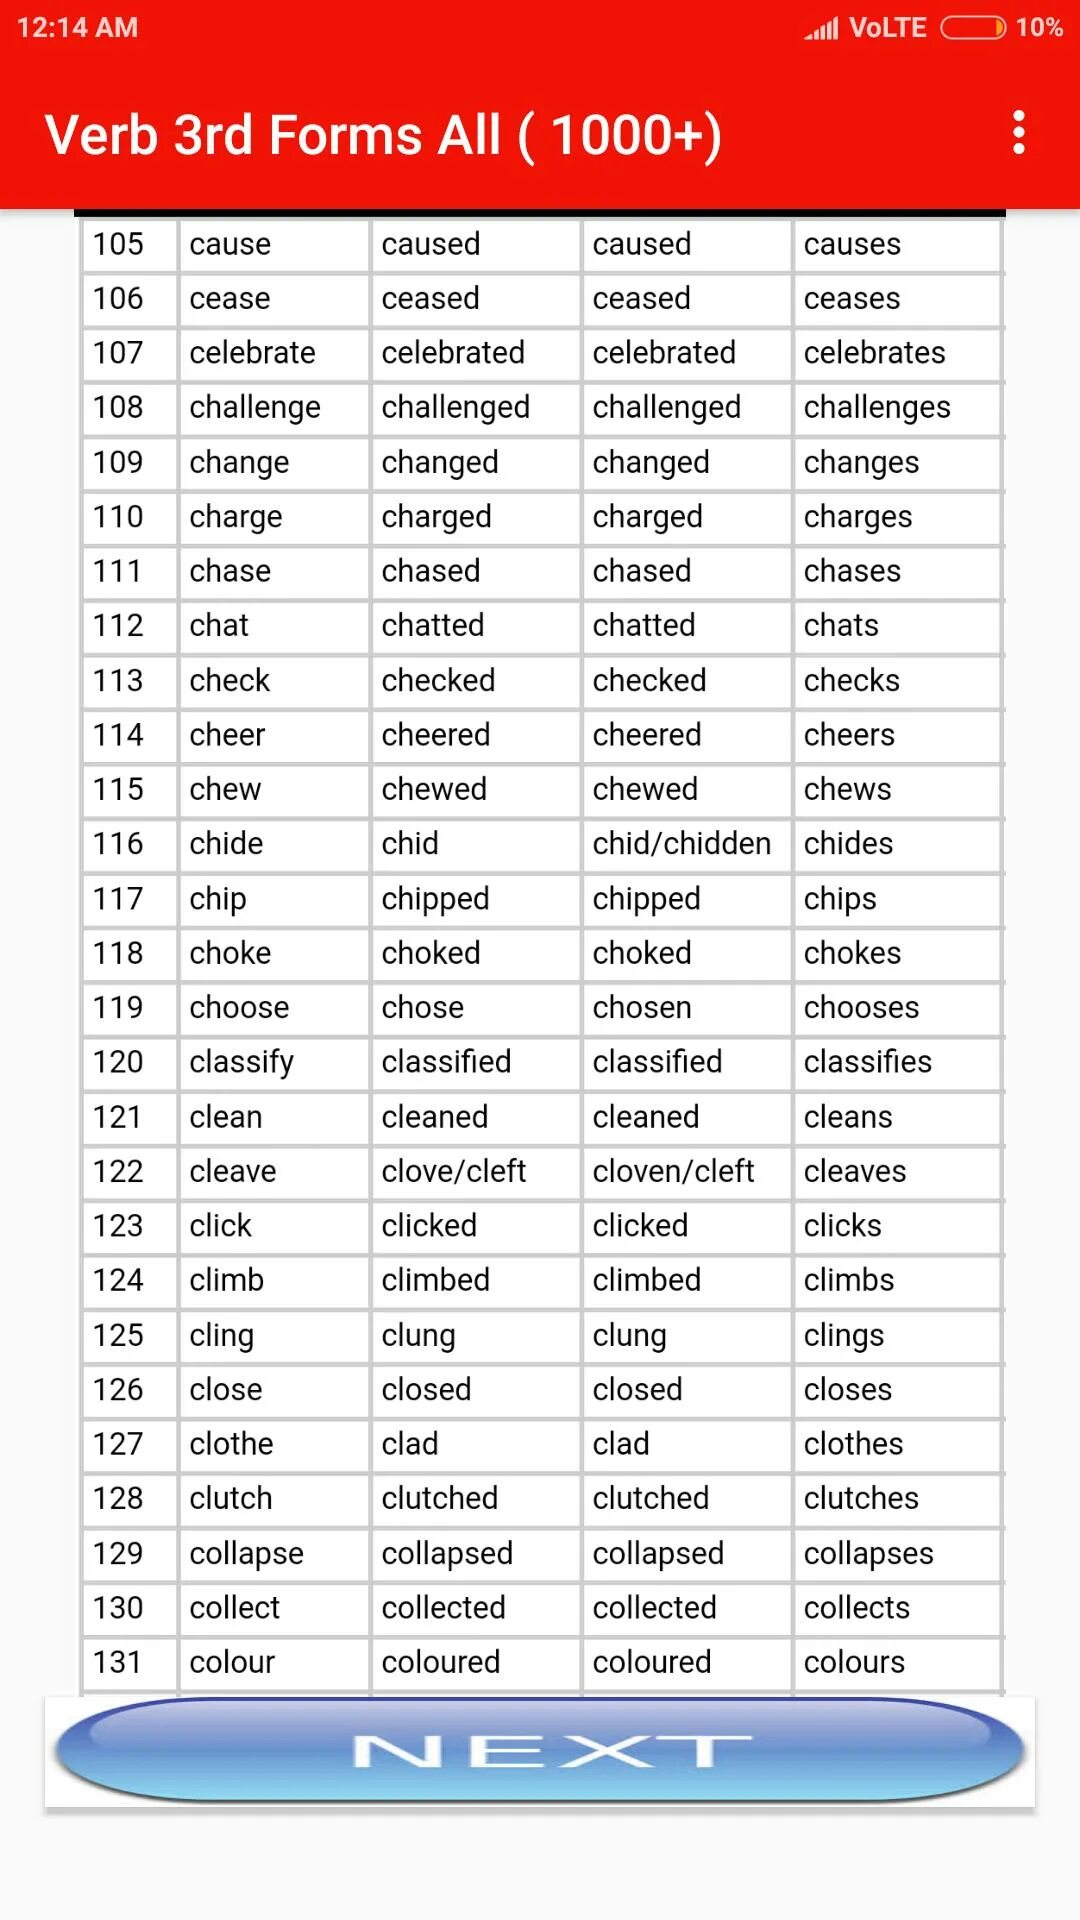 Chat forms. Chat 3 формы глагола. 3rd form of verbs. Verb forms. Buy третья форма.